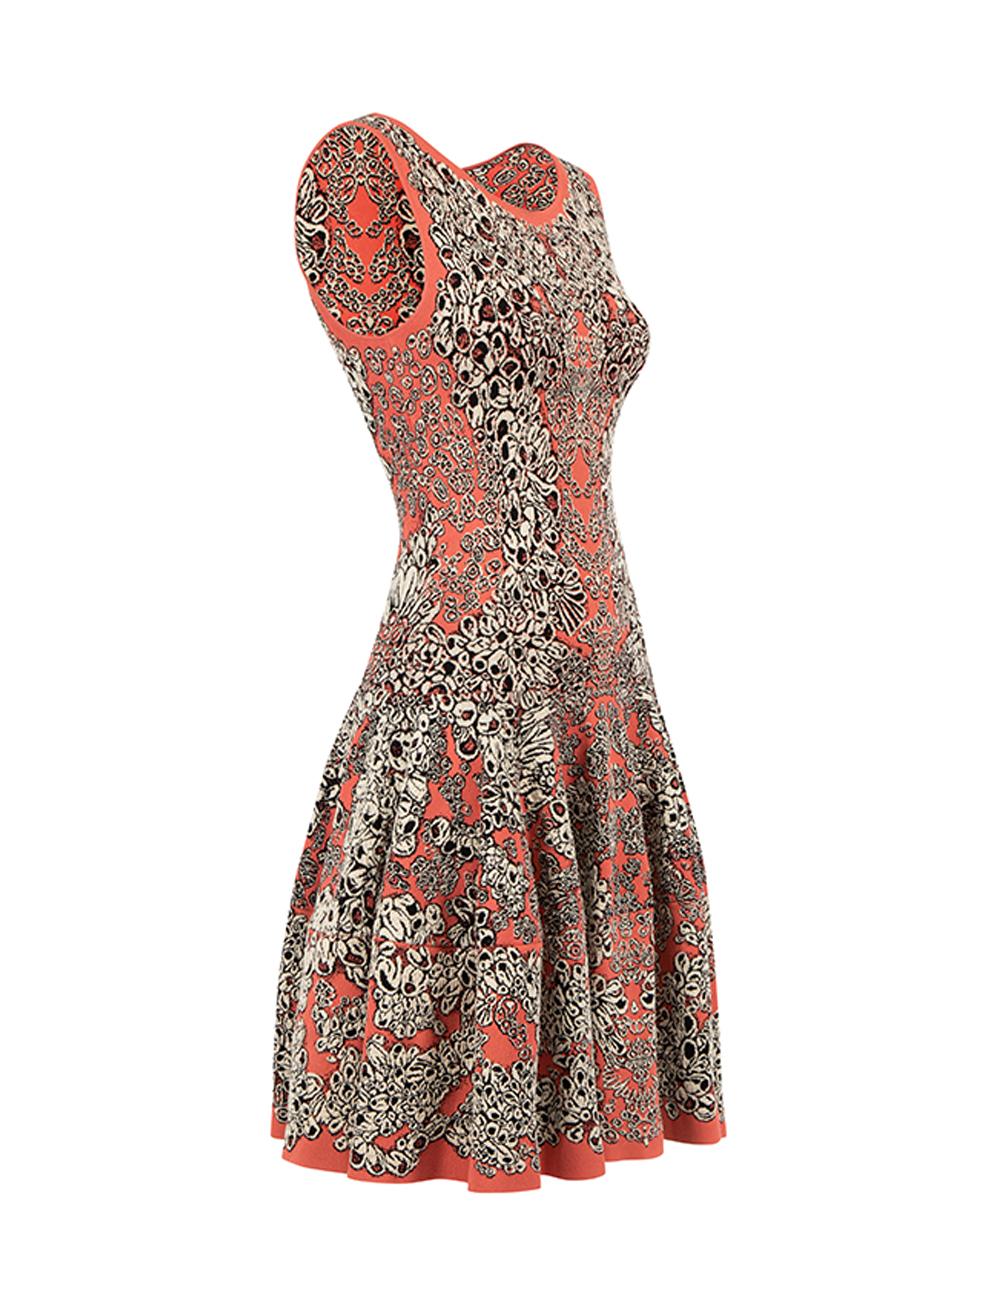 CONDITION is Very good. Hardly any visible wear to dress is evident on this used Alexander McQueen designer resale item.   Details  Multicolour Viscose Mini knit dress Floral patterned Round neckline Flared skirt   Made in Italy  Composition 70%